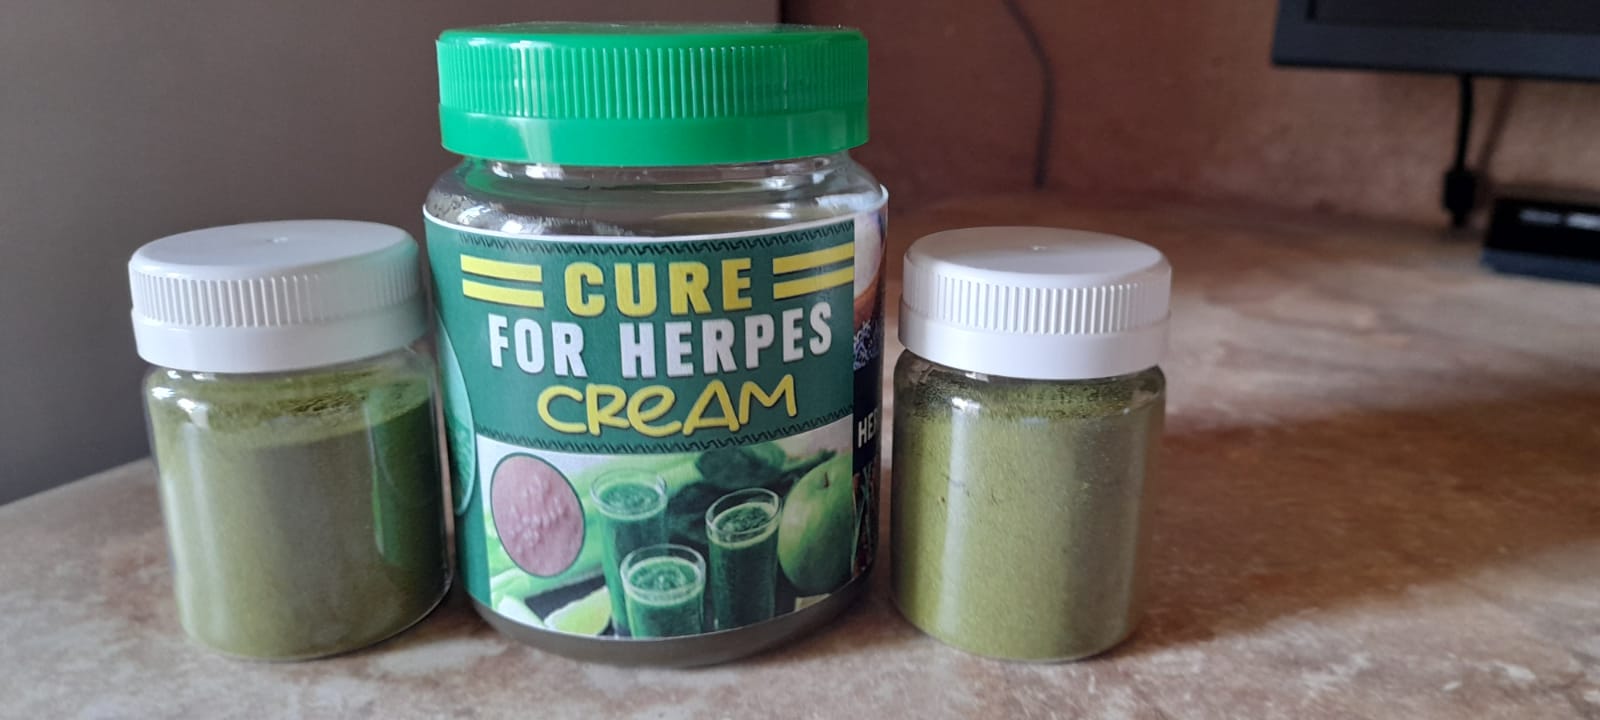 Get Rid Of Herpes And Chronic Inflammatory Diseases In Pontiac Illinois, United States Call +27710732372 In Hisor City in Tajikistan, Online Event